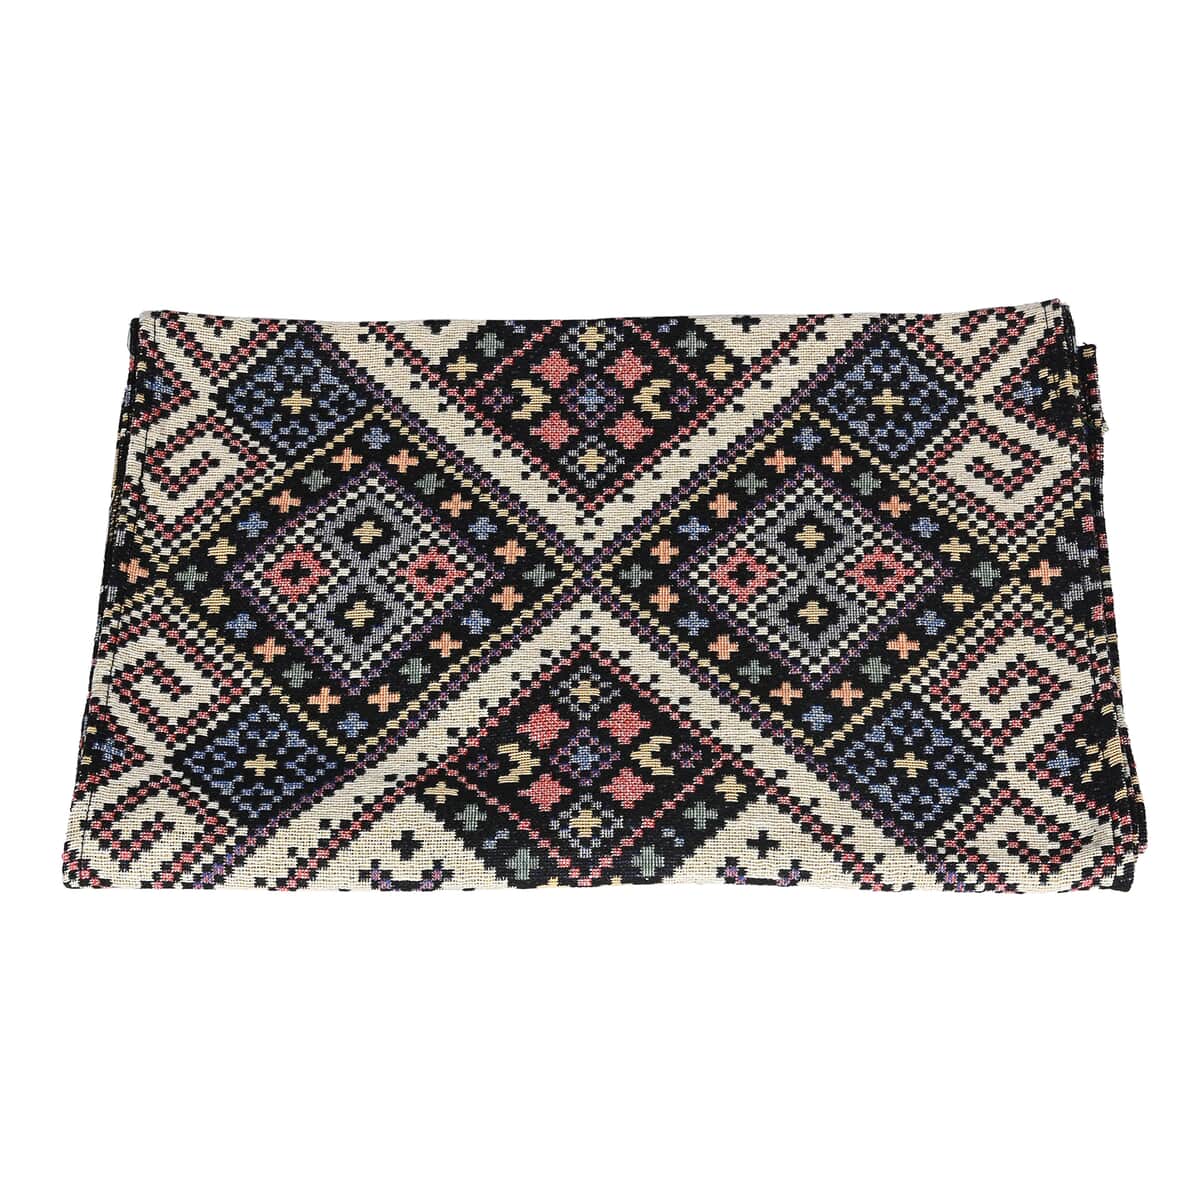 Kilim Pattern Poly Cotton Multi Color Table Runner 65% Cotton & 35% Polyester, Washable Runner Rugs, Wrinkle Resistant Table Linen image number 0